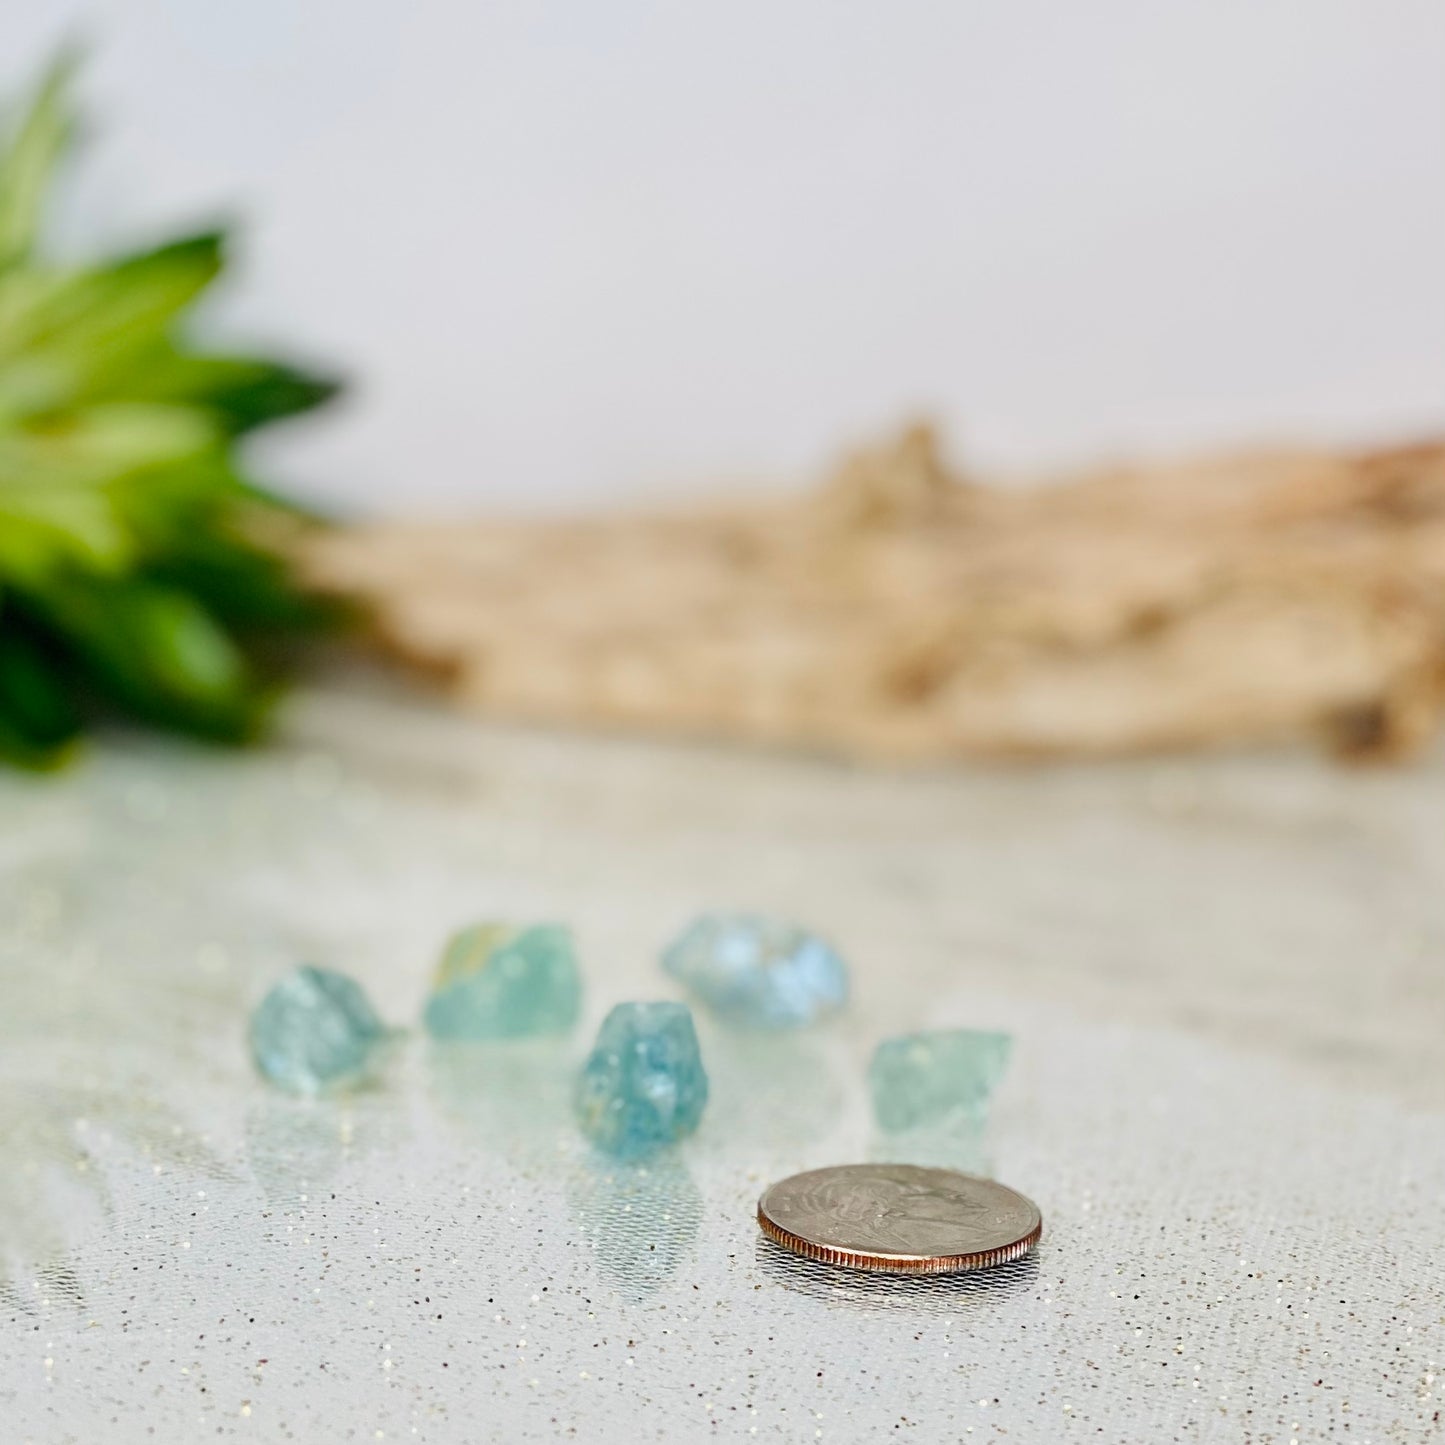 Raw Aquamarine Crystal Chunks: Tranquil Beauty from Earth's Depths